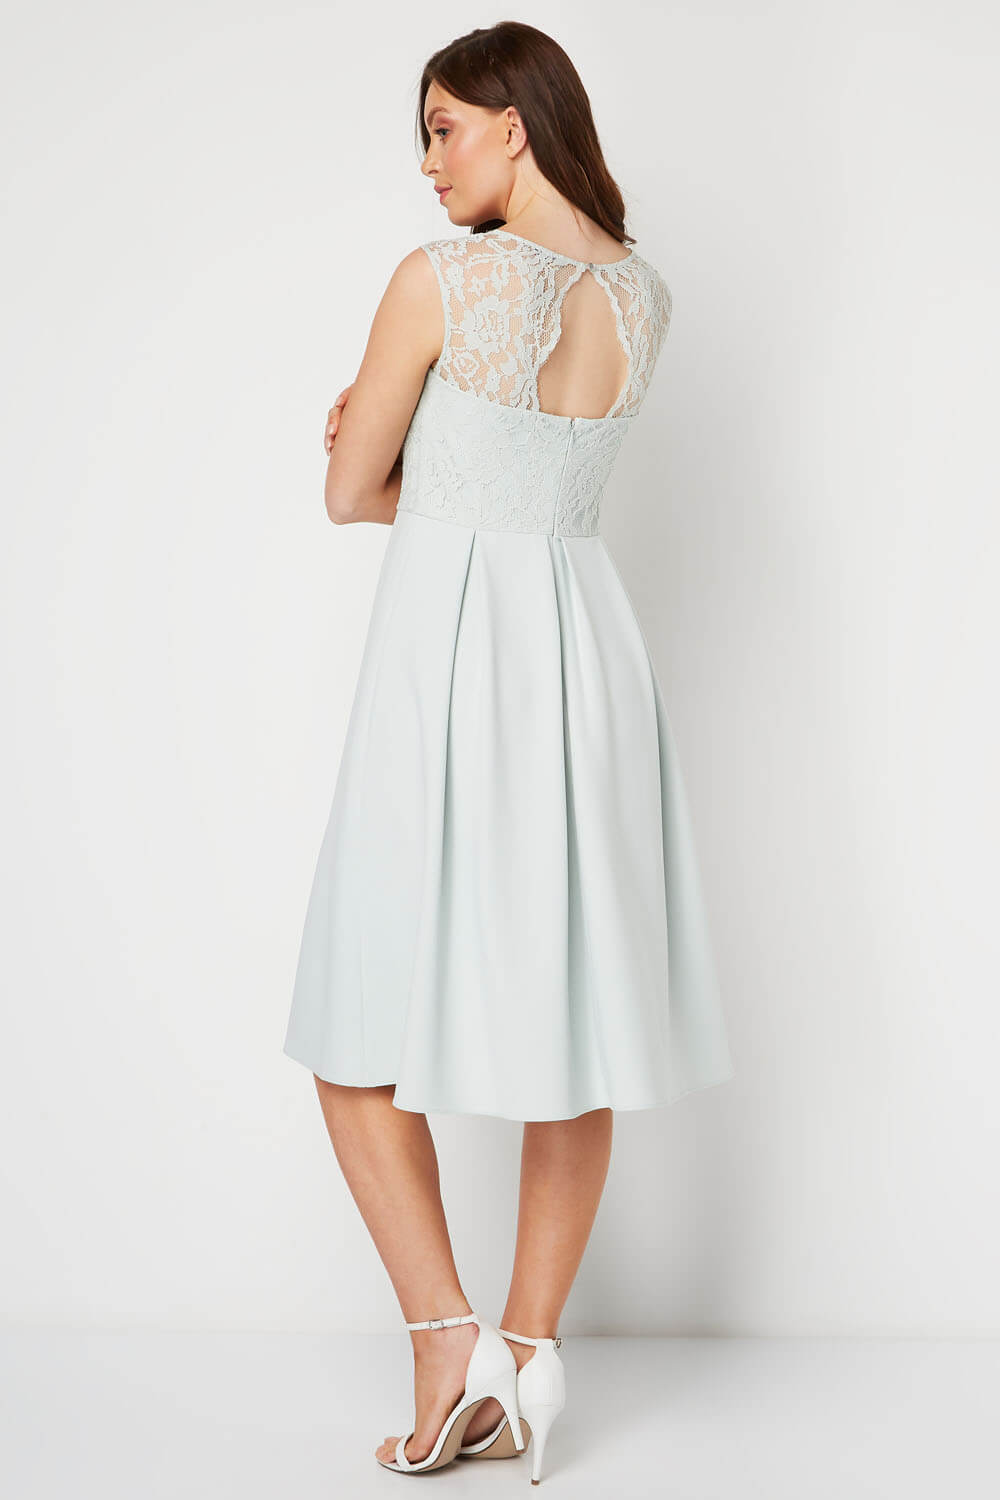 Sage Lace Fit and Flare Midi Dress, Image 3 of 5